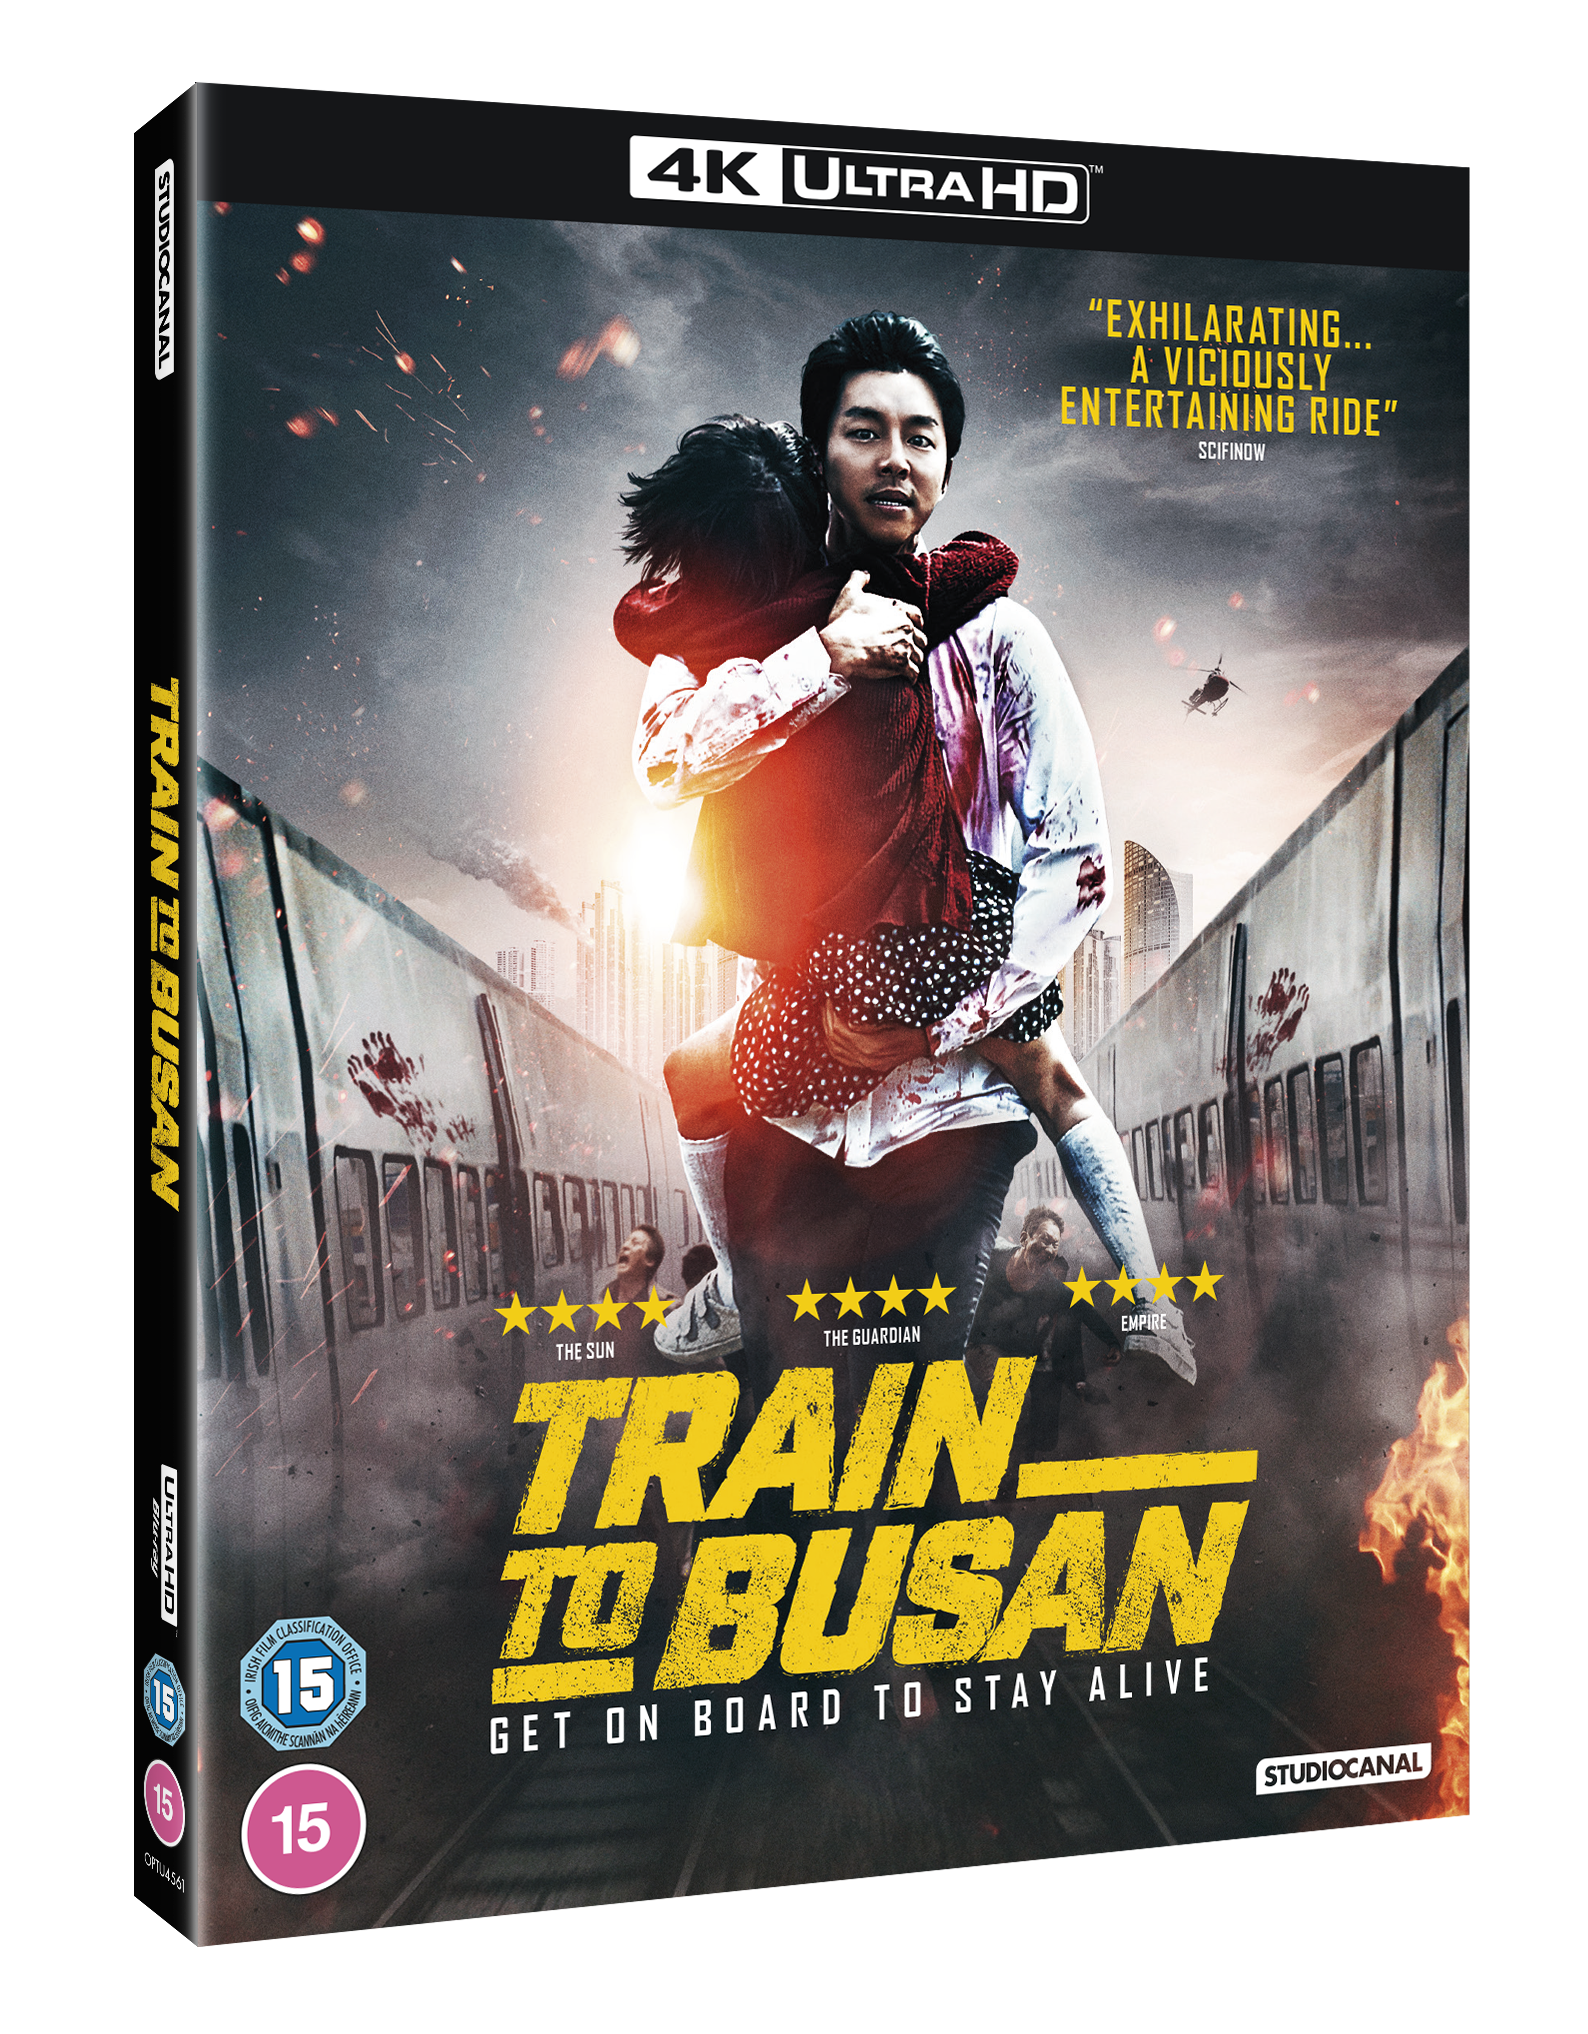 Acclaimed Horean horror Train to Busan makes its 4k debut